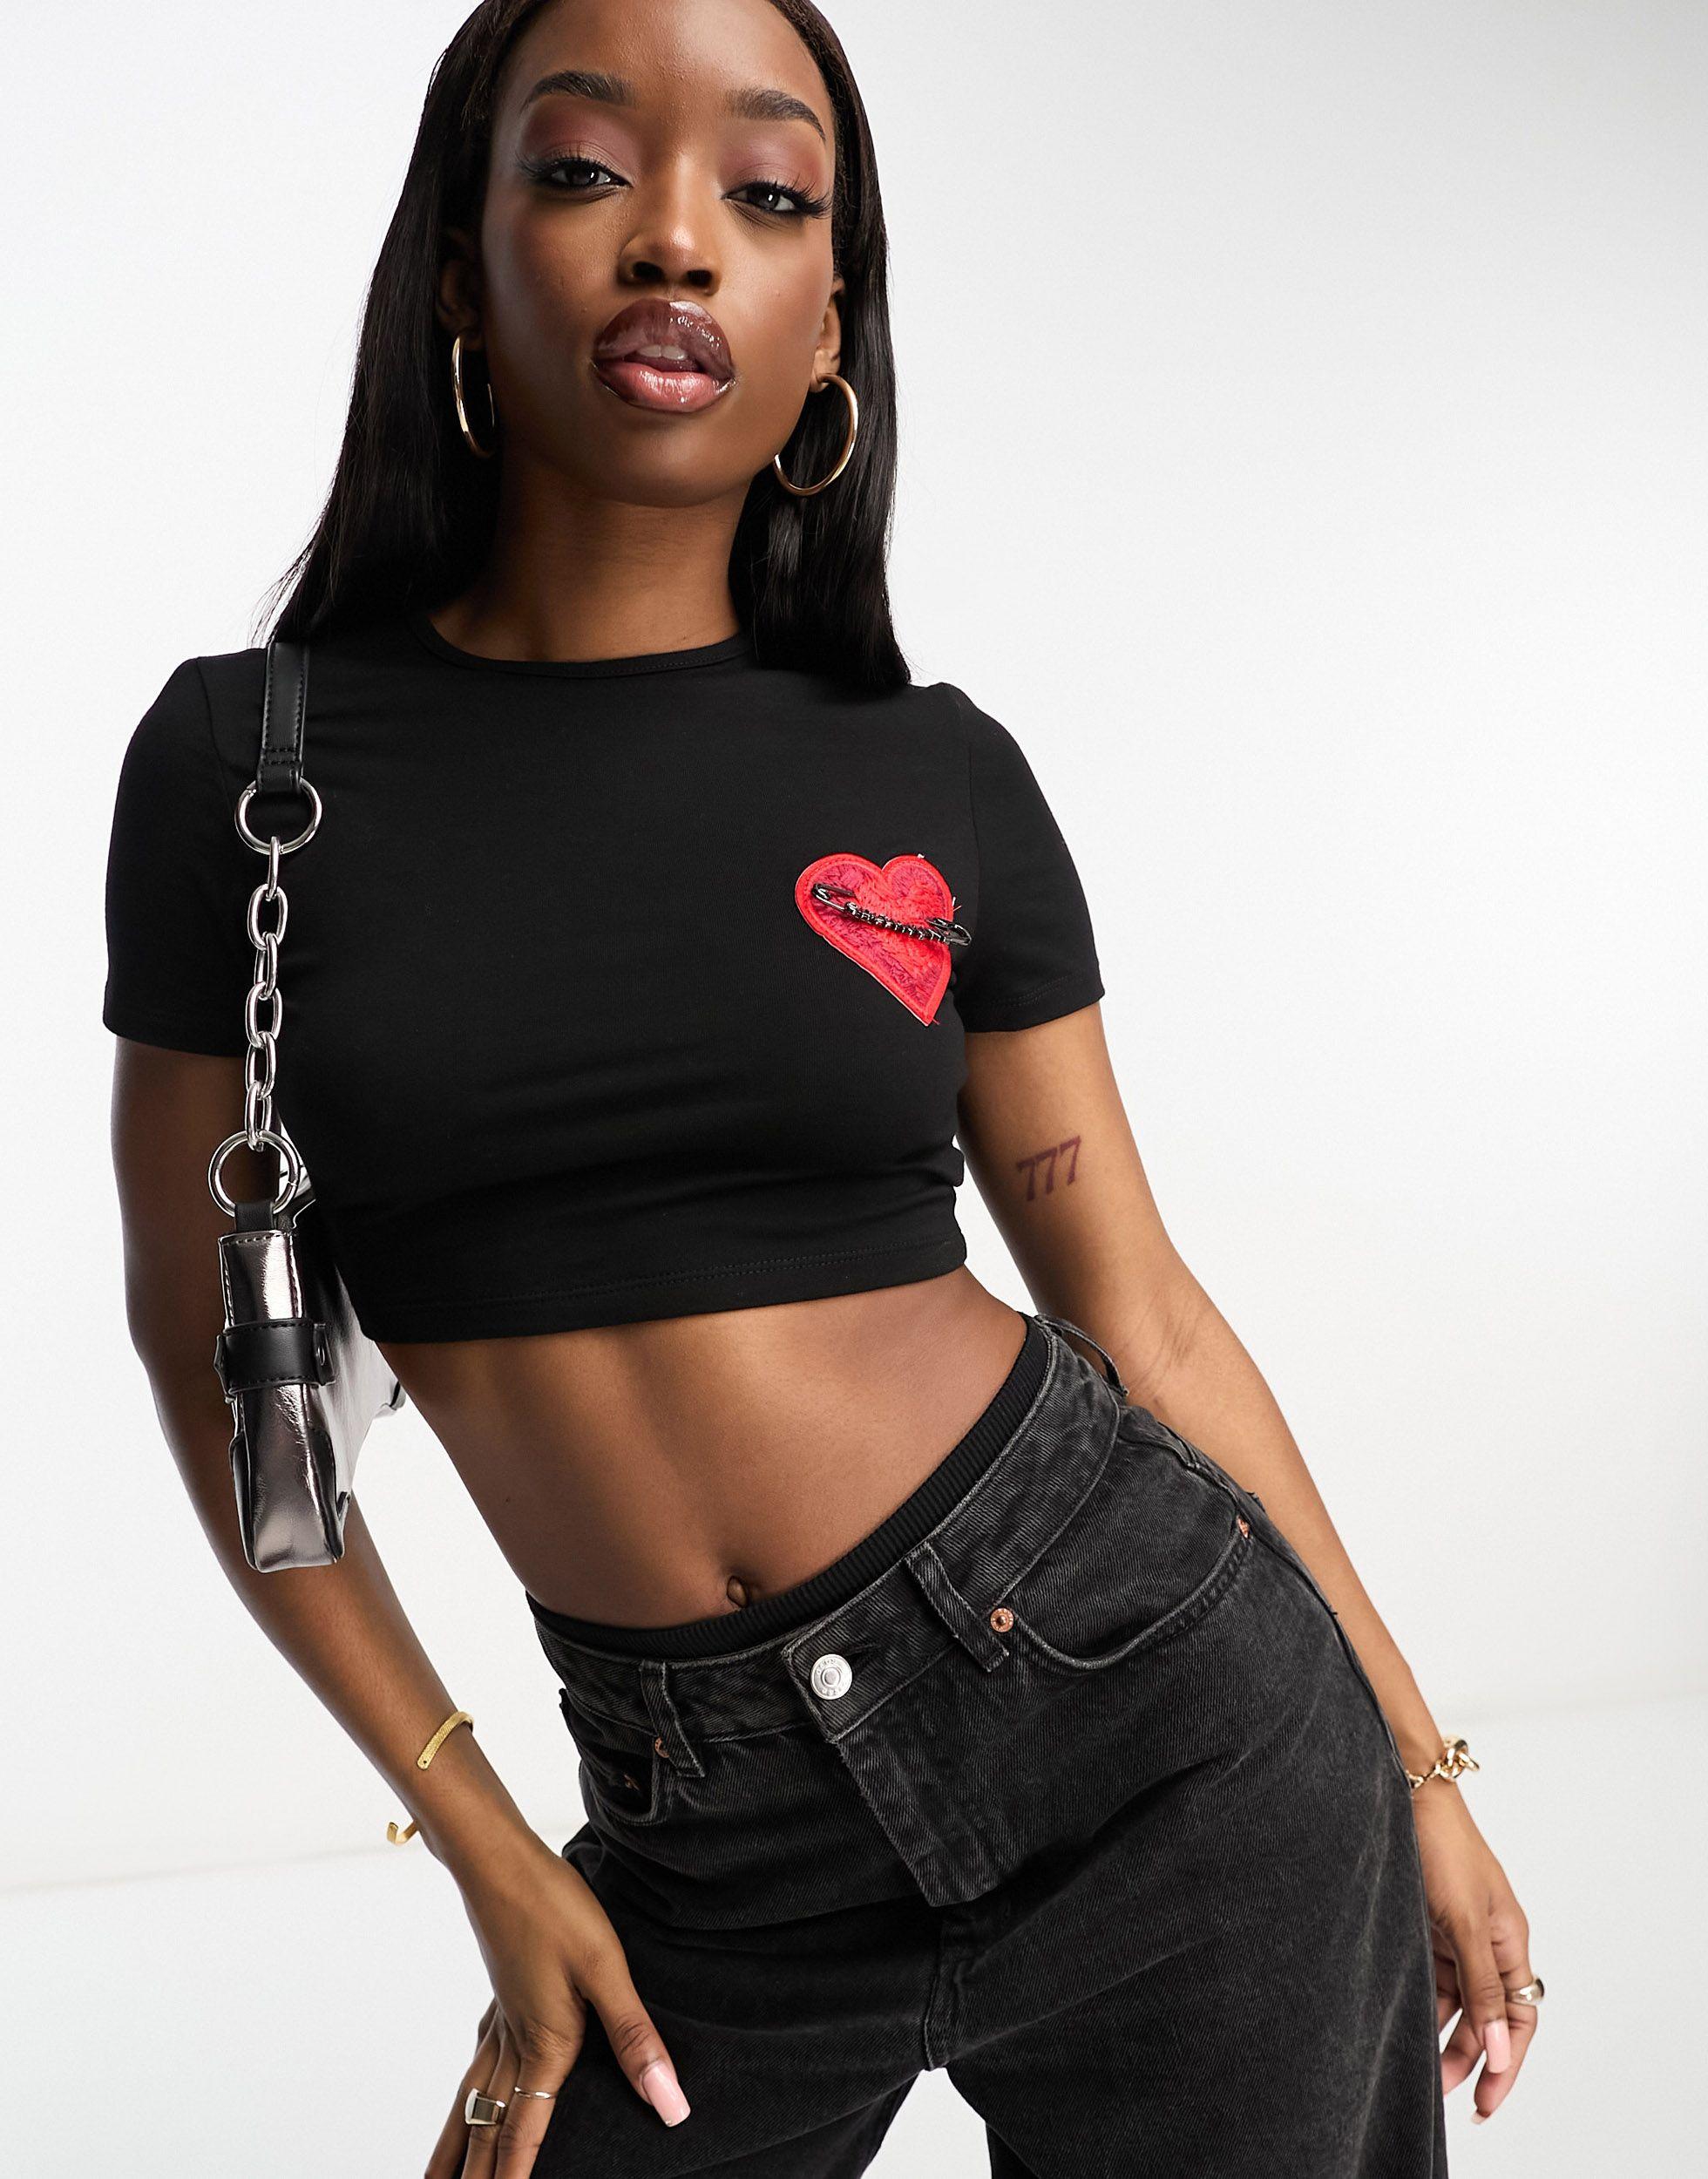 Sixth Heart Fitted Crop Top in Black | Lyst